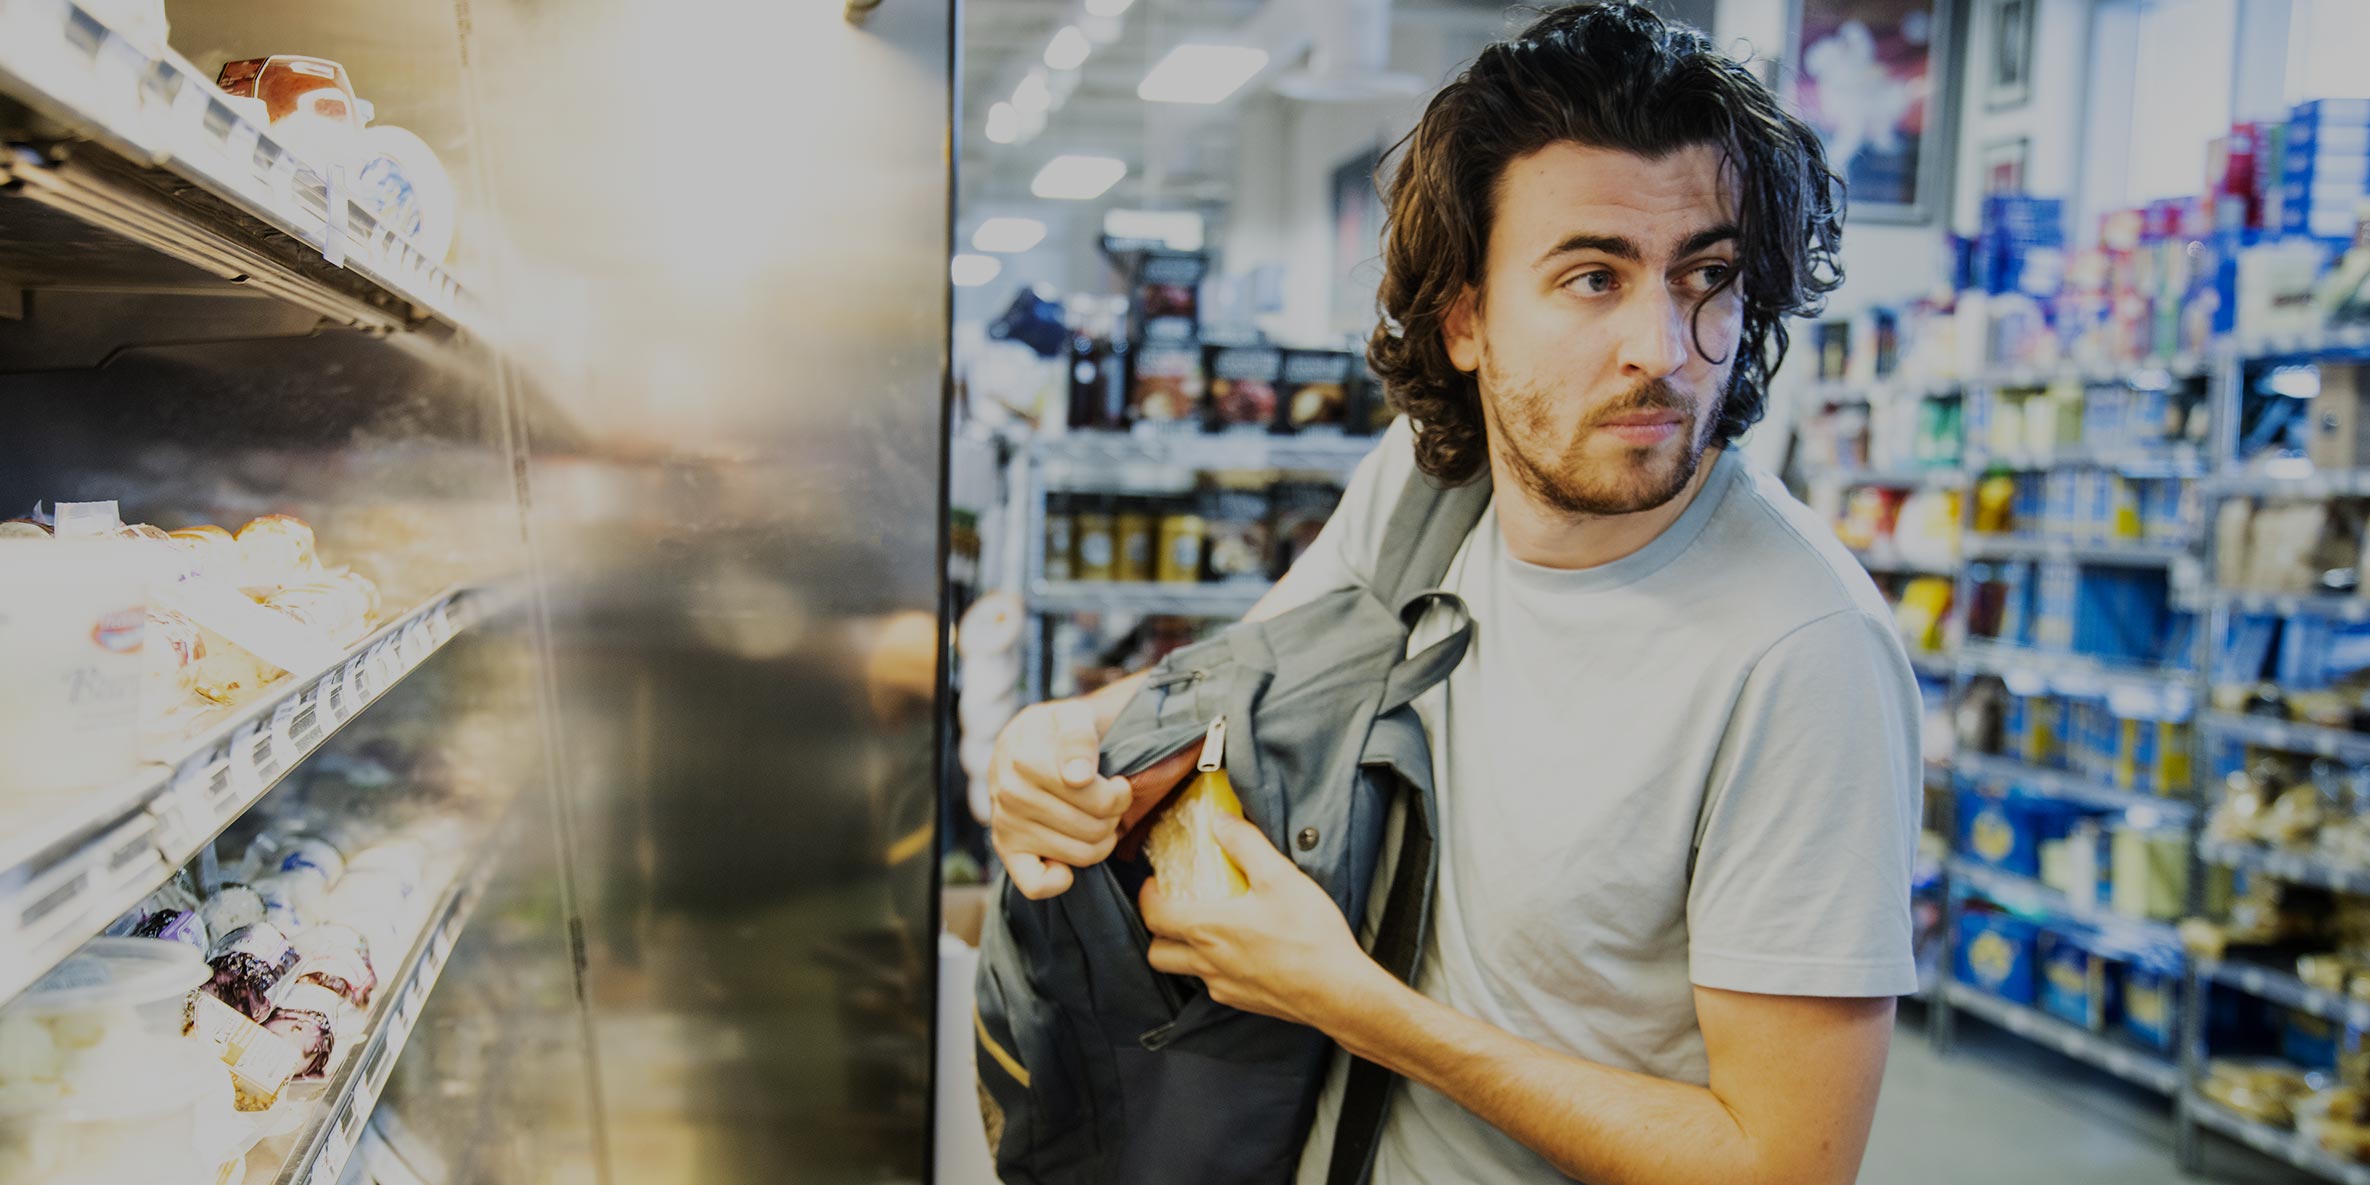 5 Signs of a Shoplifter